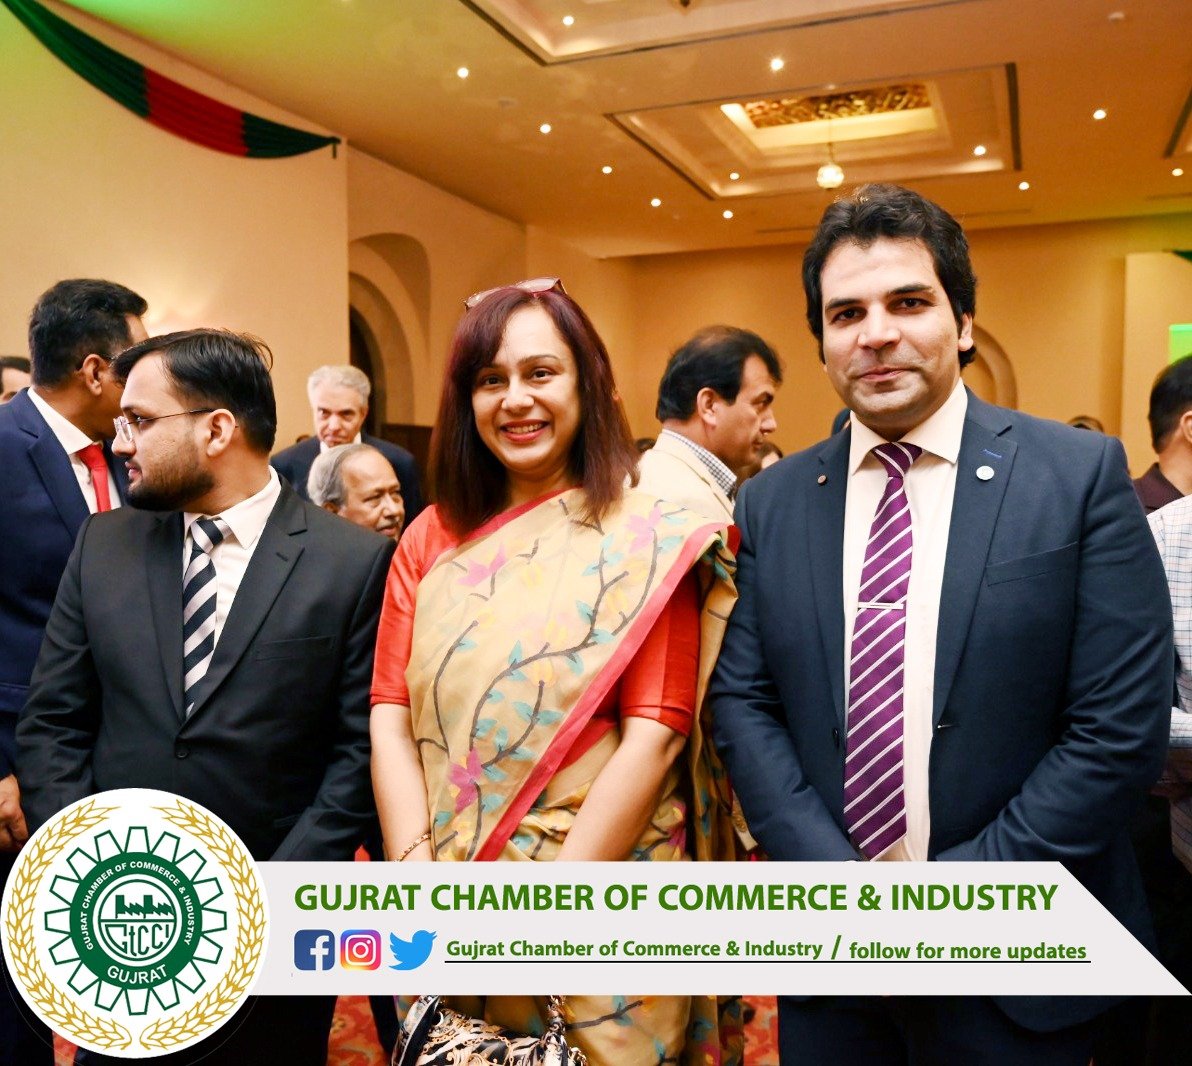 Mr. Sikander Ishfaq Razi #President, Gujrat Chamber of Commerce & Industry , Mr. Ch M Asad Bhatti #SVP and Mr. M Masoom Qamar #VP attended the 53rd #Anniversary of #Independence & National Day of #Bangladesh on the Invitation of H.E. Mr. Md. Ruhul Aalm Siddique The High Commissioner for the People’s Republic of Bangladesh and Mrs Shamshad Ara Khanam.